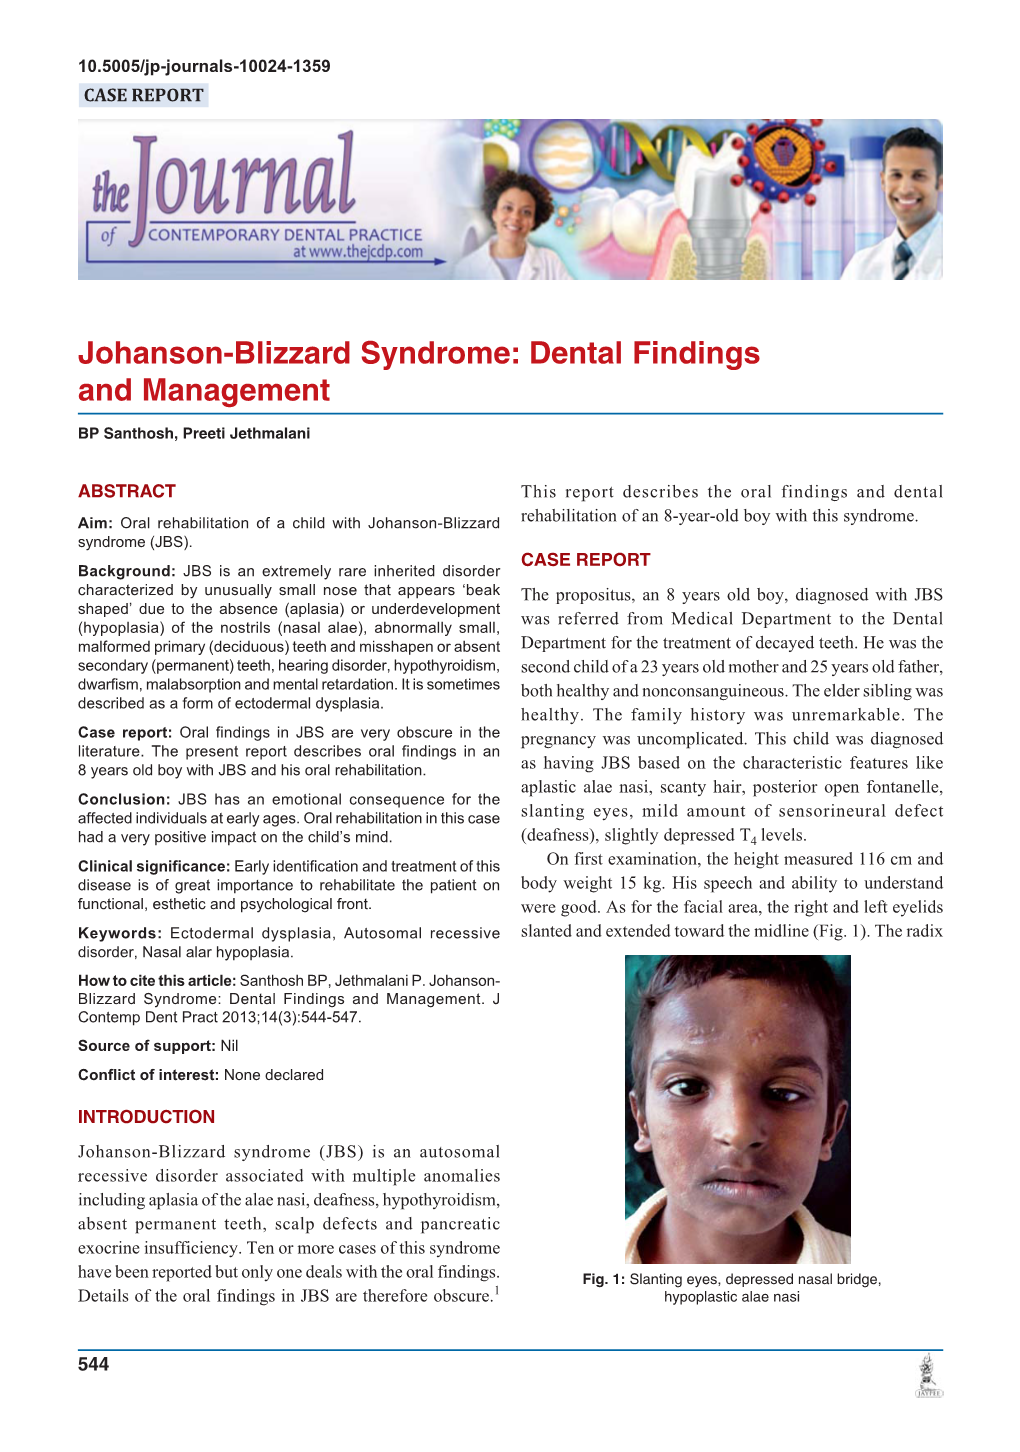 Johanson-Blizzard Syndrome: Dental Findings and Management